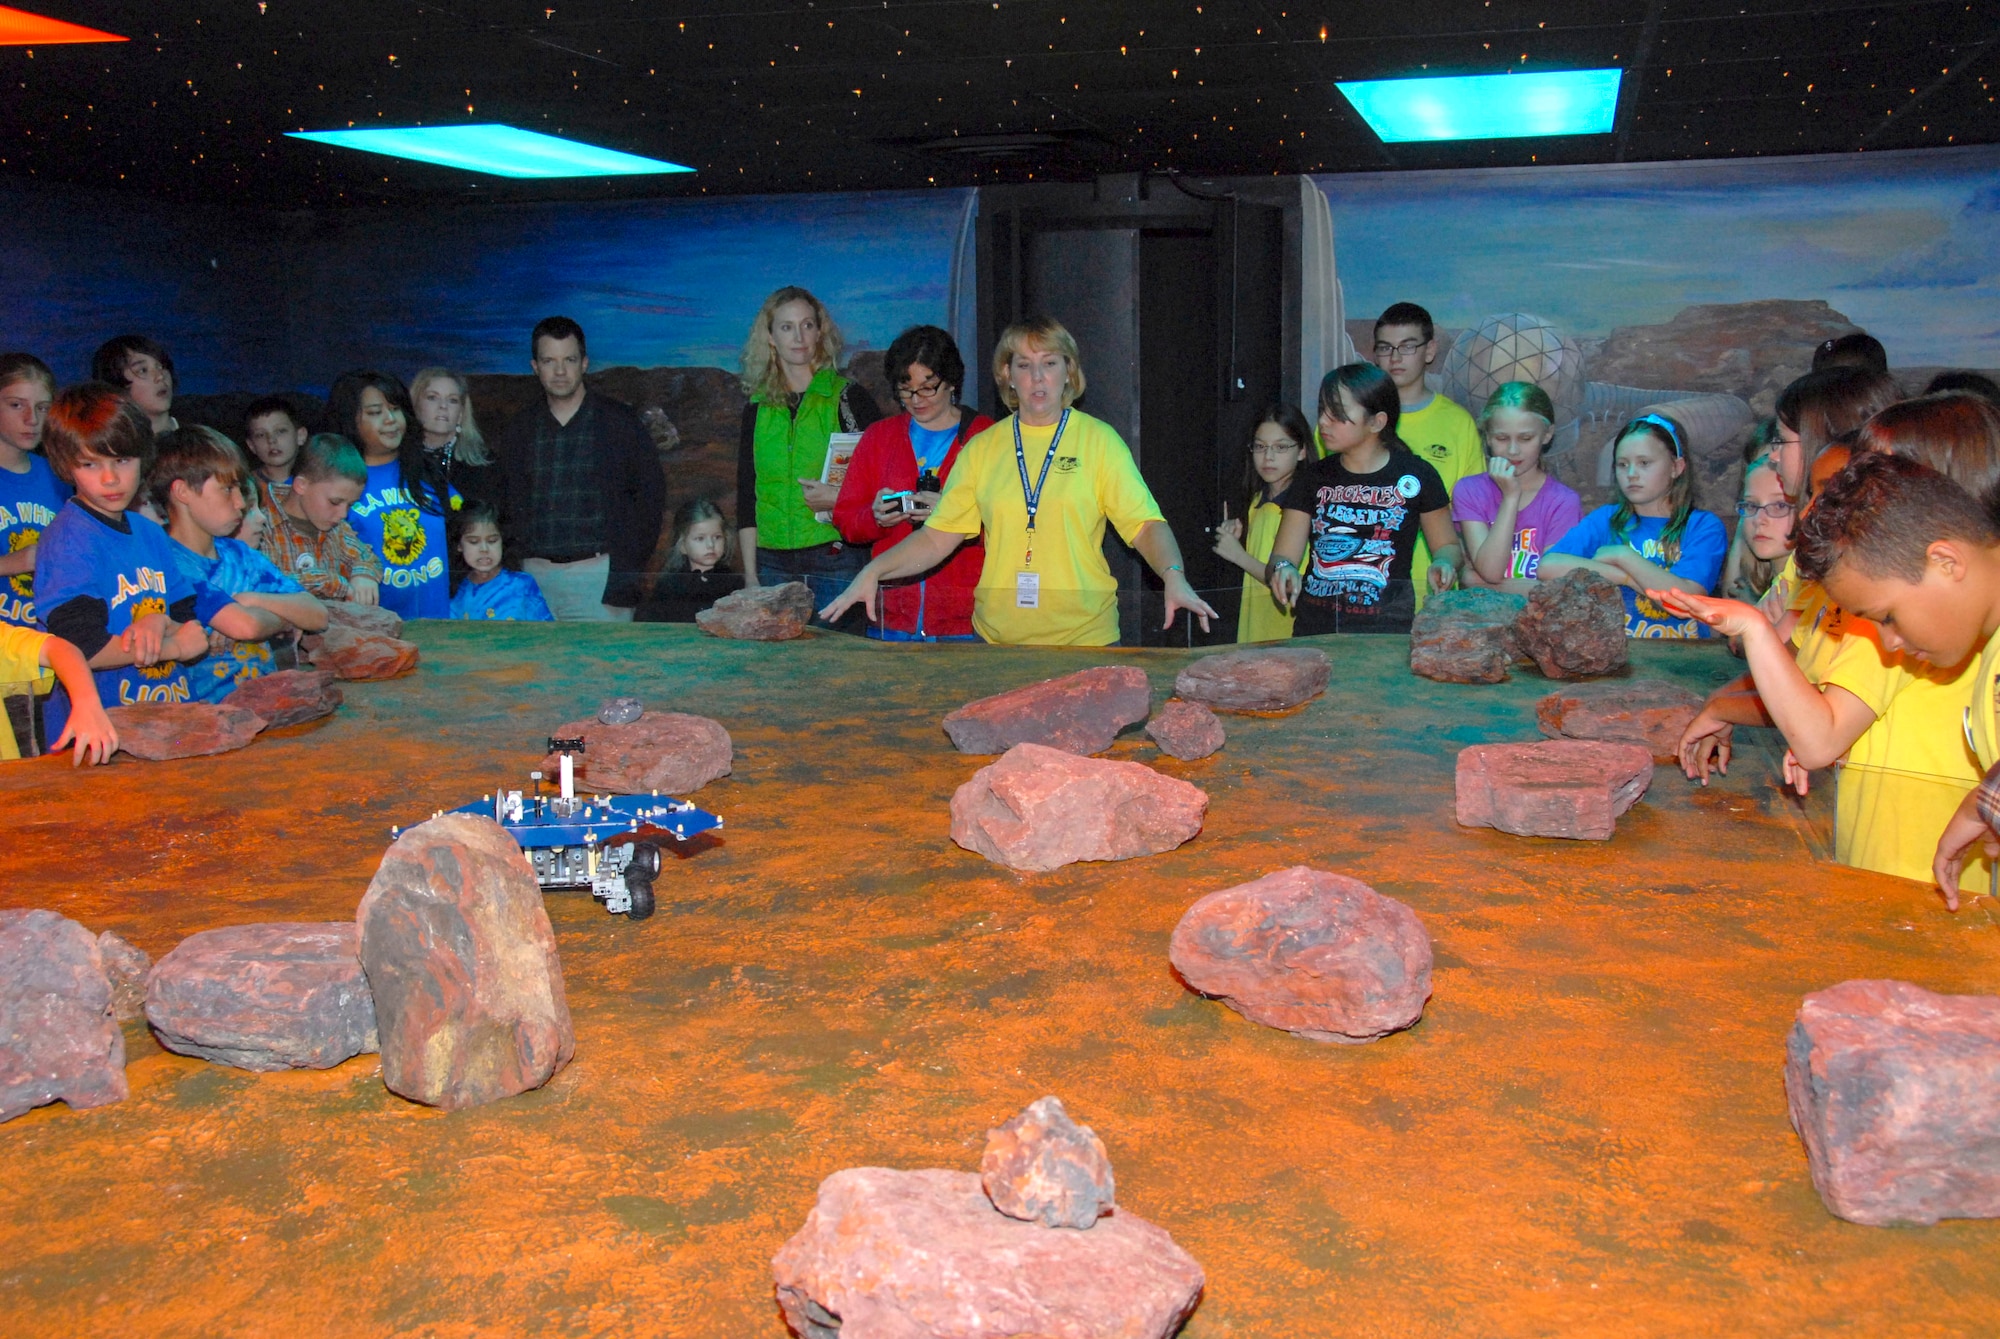 As a part of their tour for the First Lego League, students visited a replica of the Martian surface, led by teacher Becky Hill, at Starbase. Maxwell Elementary School hosted six regional schools for the FLL gathering, including six from Fort Benning, Ga. and one from Fort Rucker, Ala., on March 31. (Air Force photo by Jamie Pitcher)